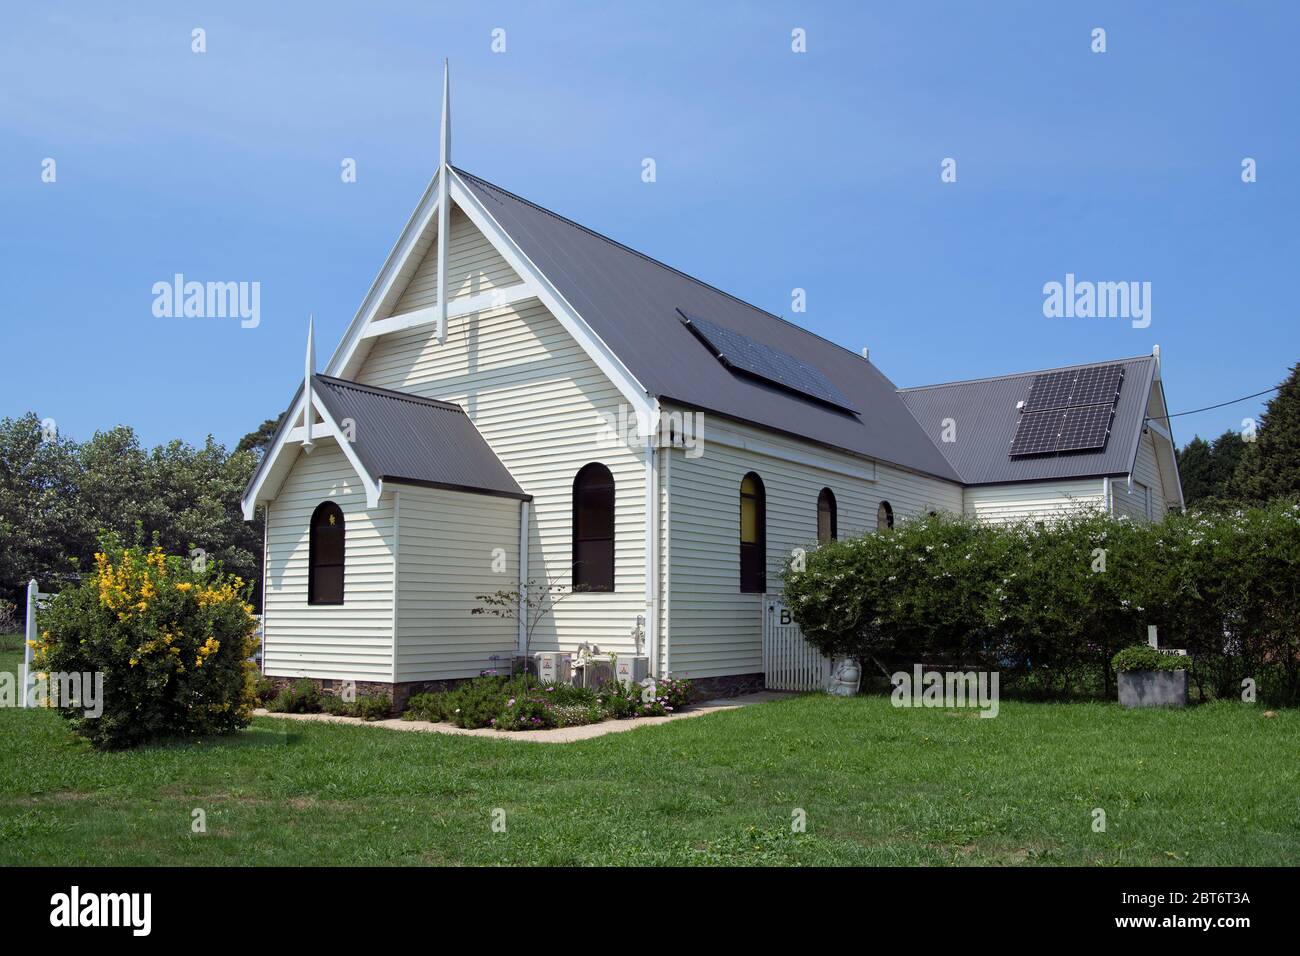 White Weatherboard Church Robertson Kangaroo Valley NSW Australie Banque D'Images